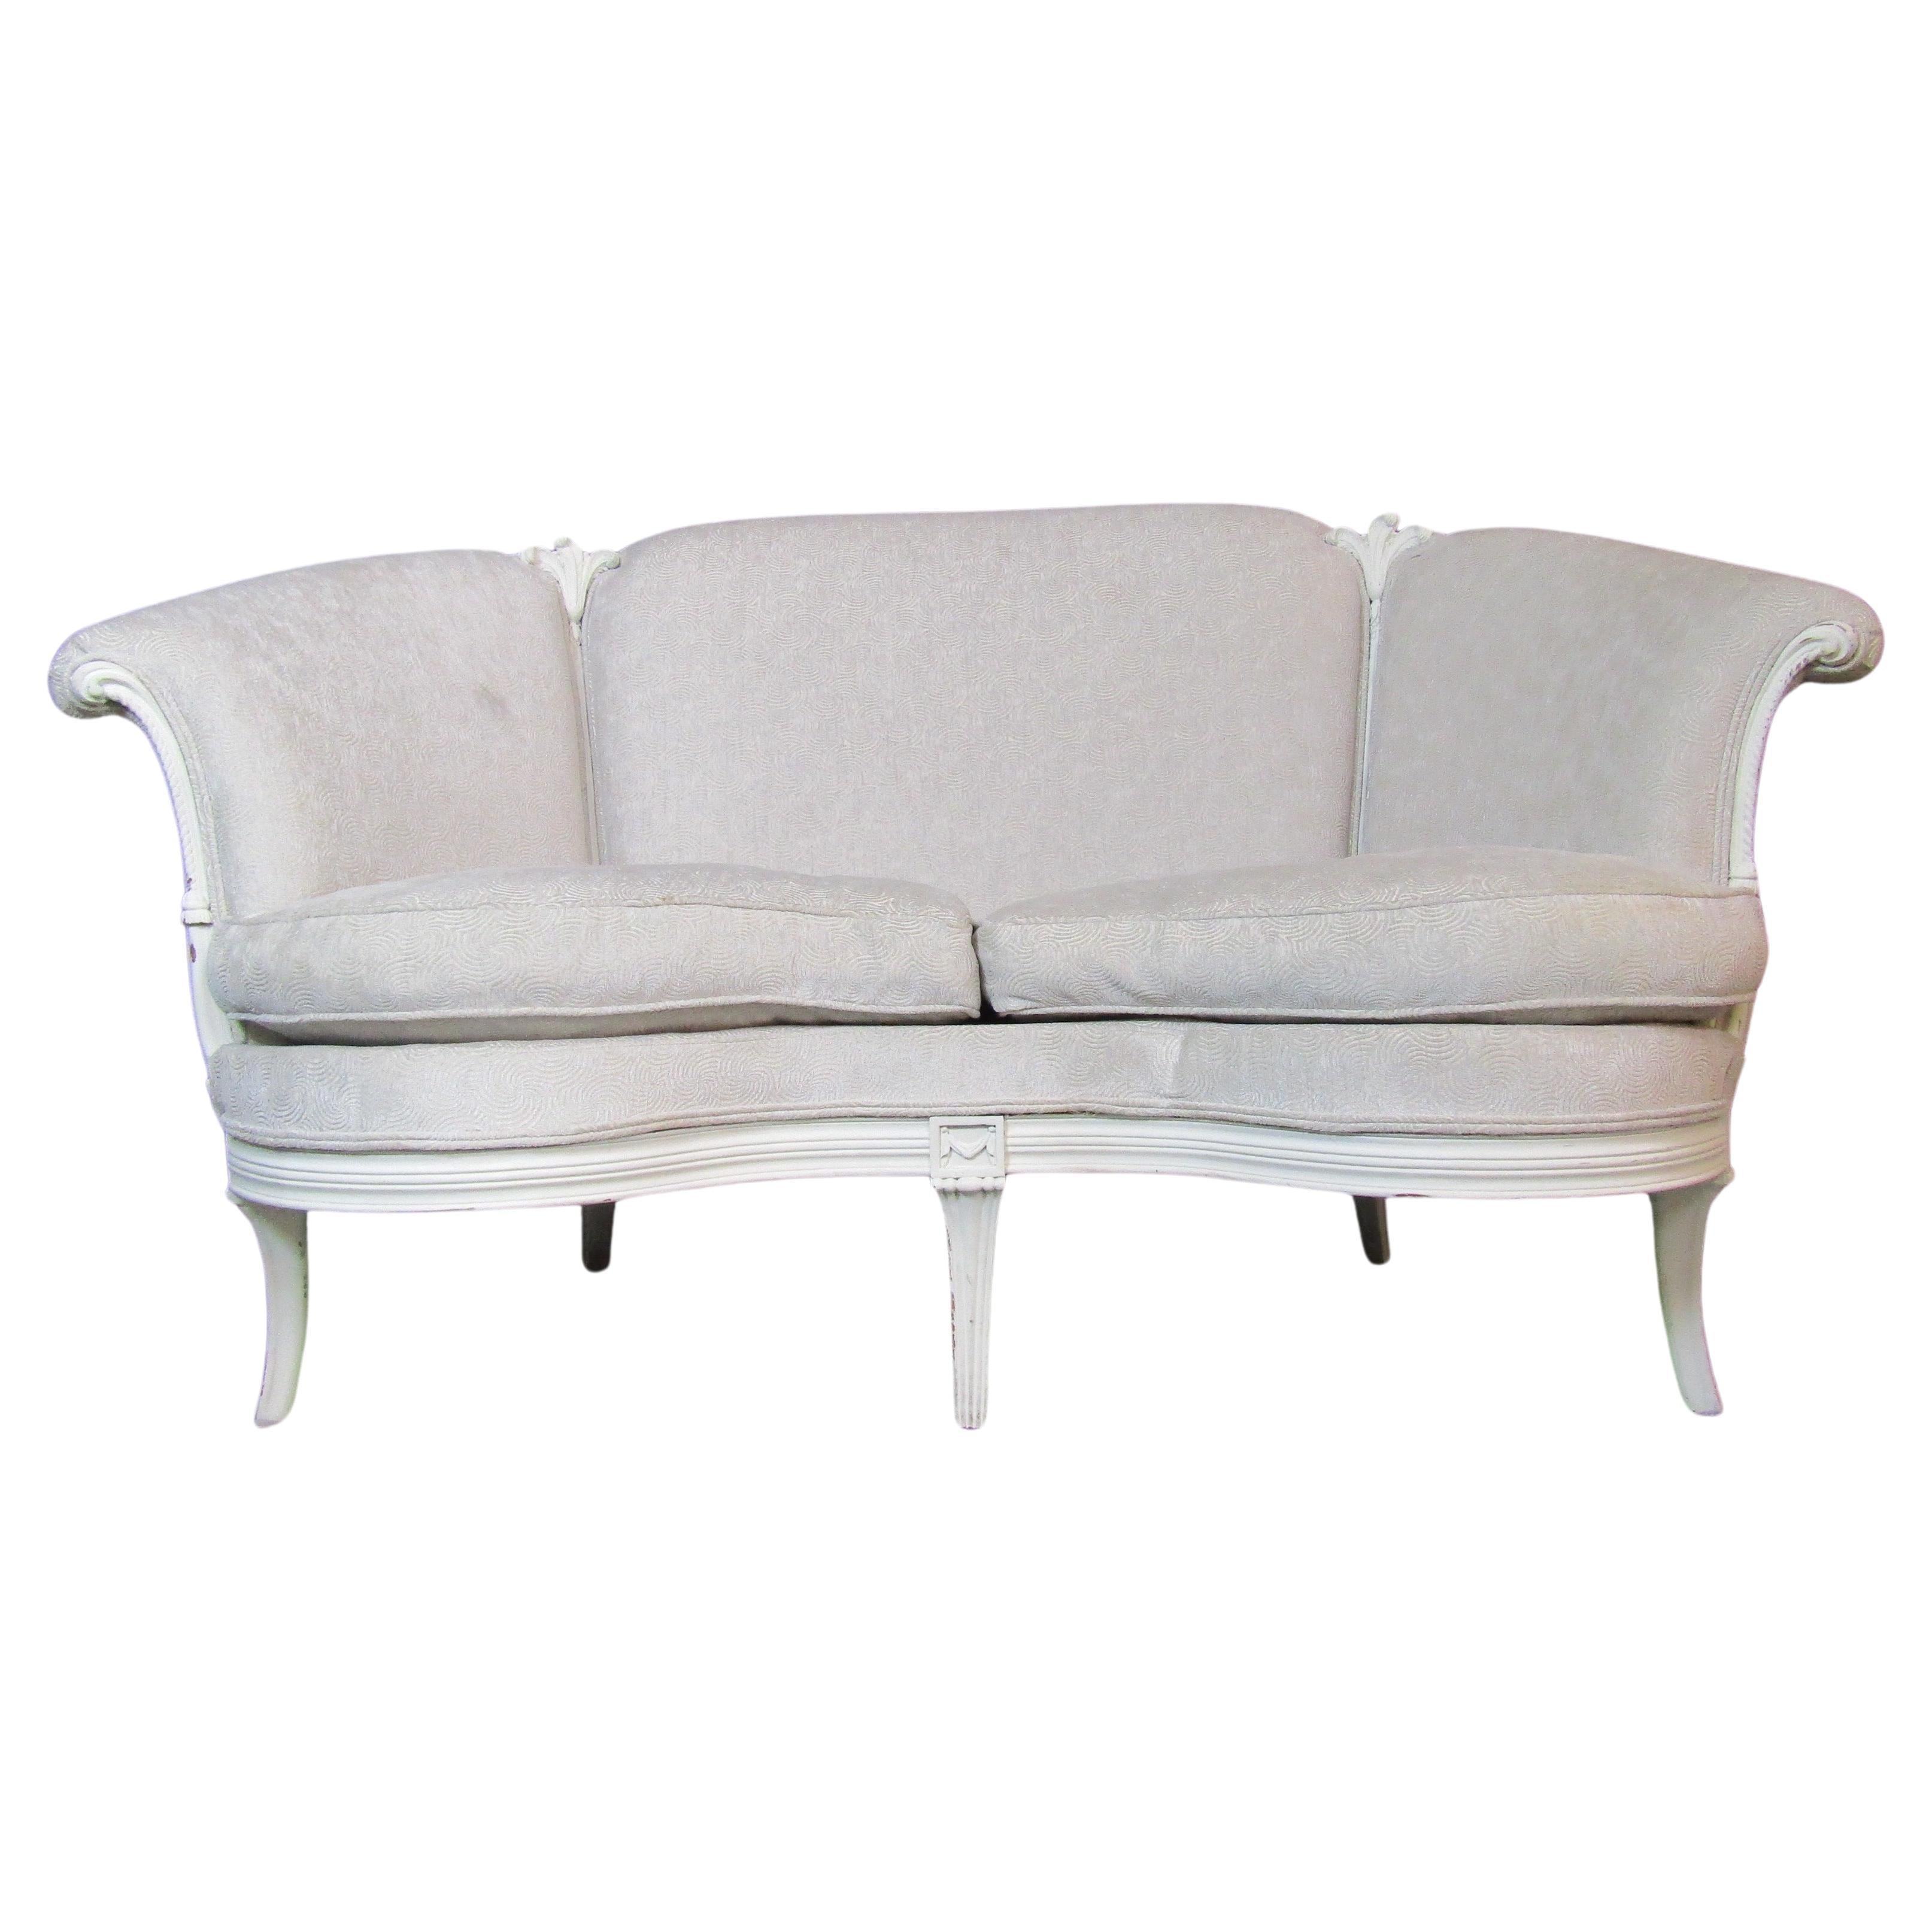 French Antique Style Loveseat For Sale